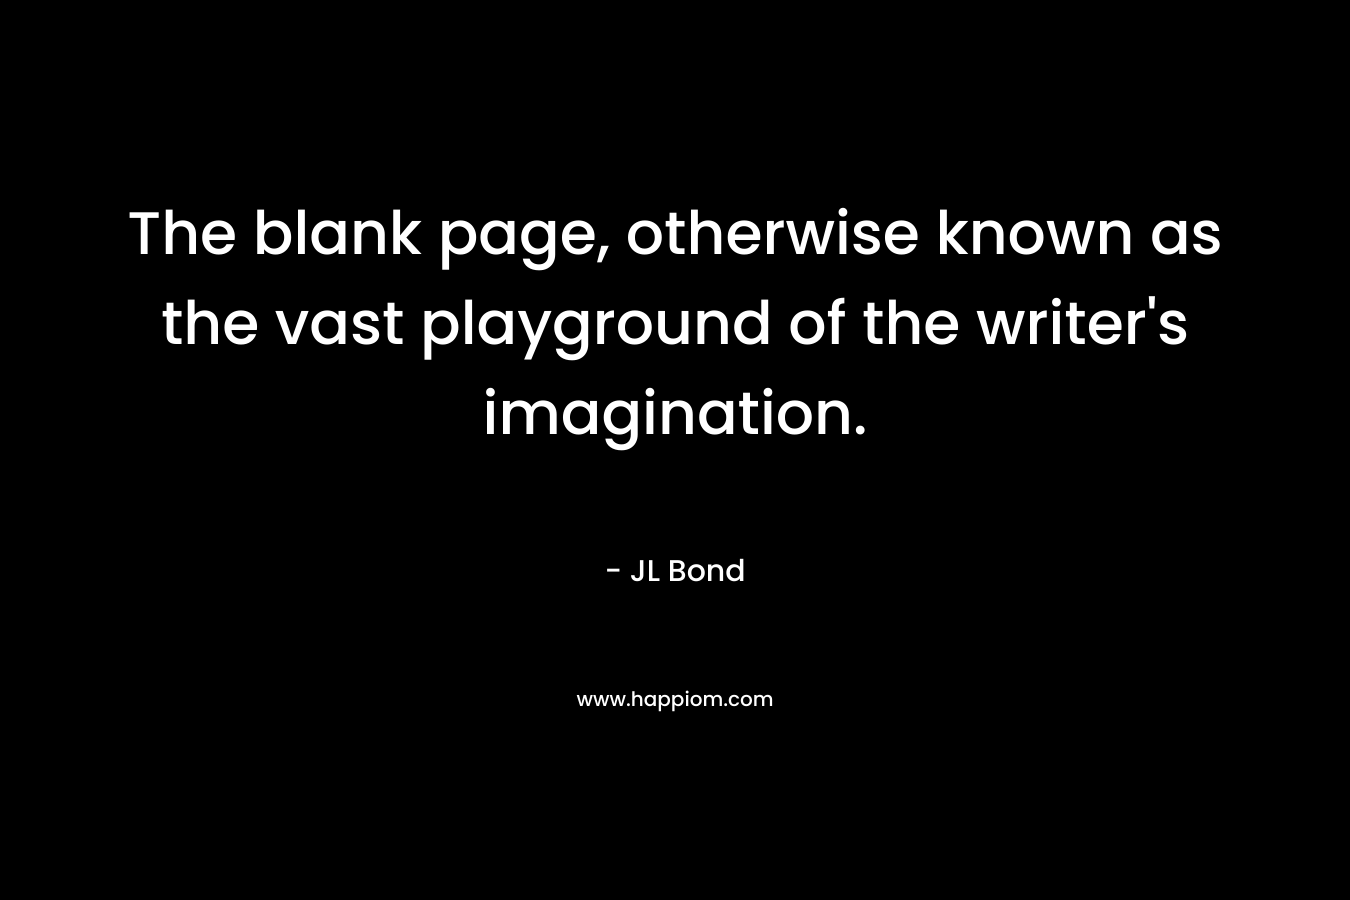 The blank page, otherwise known as the vast playground of the writer’s imagination. – JL Bond